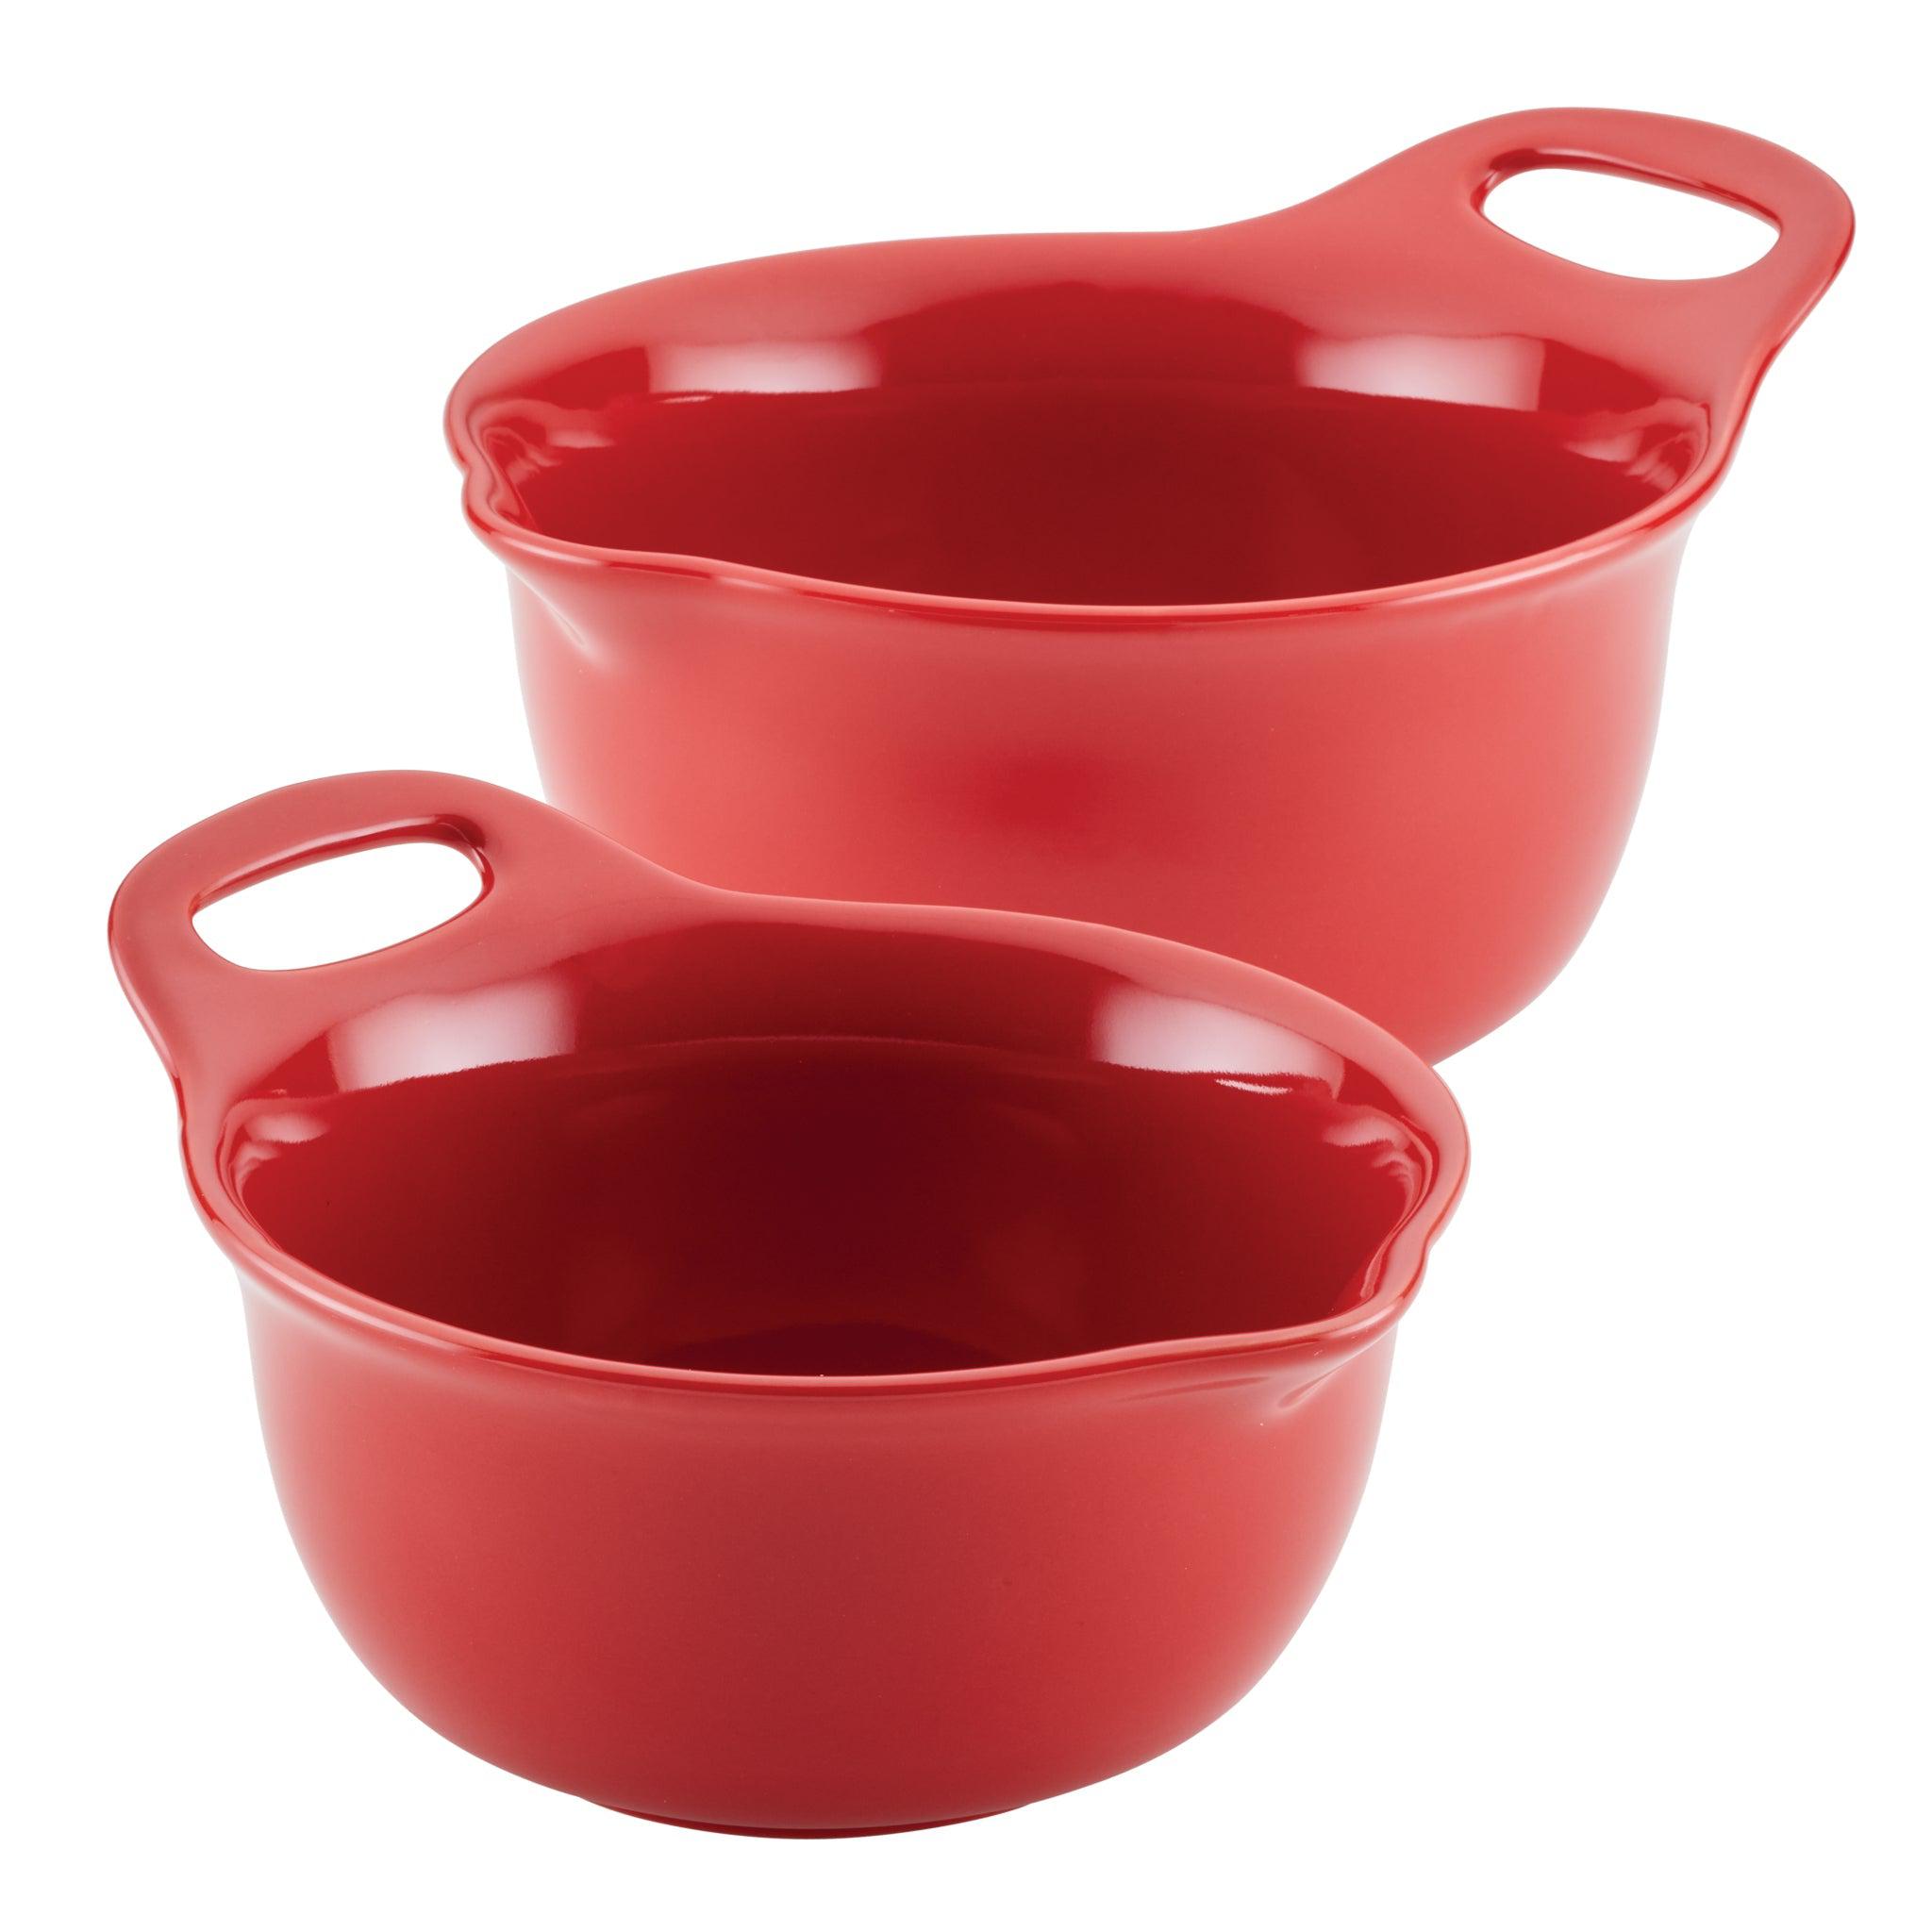 Tools and Gadgets 2-Piece Ceramic Mixing Bowl Set | Red